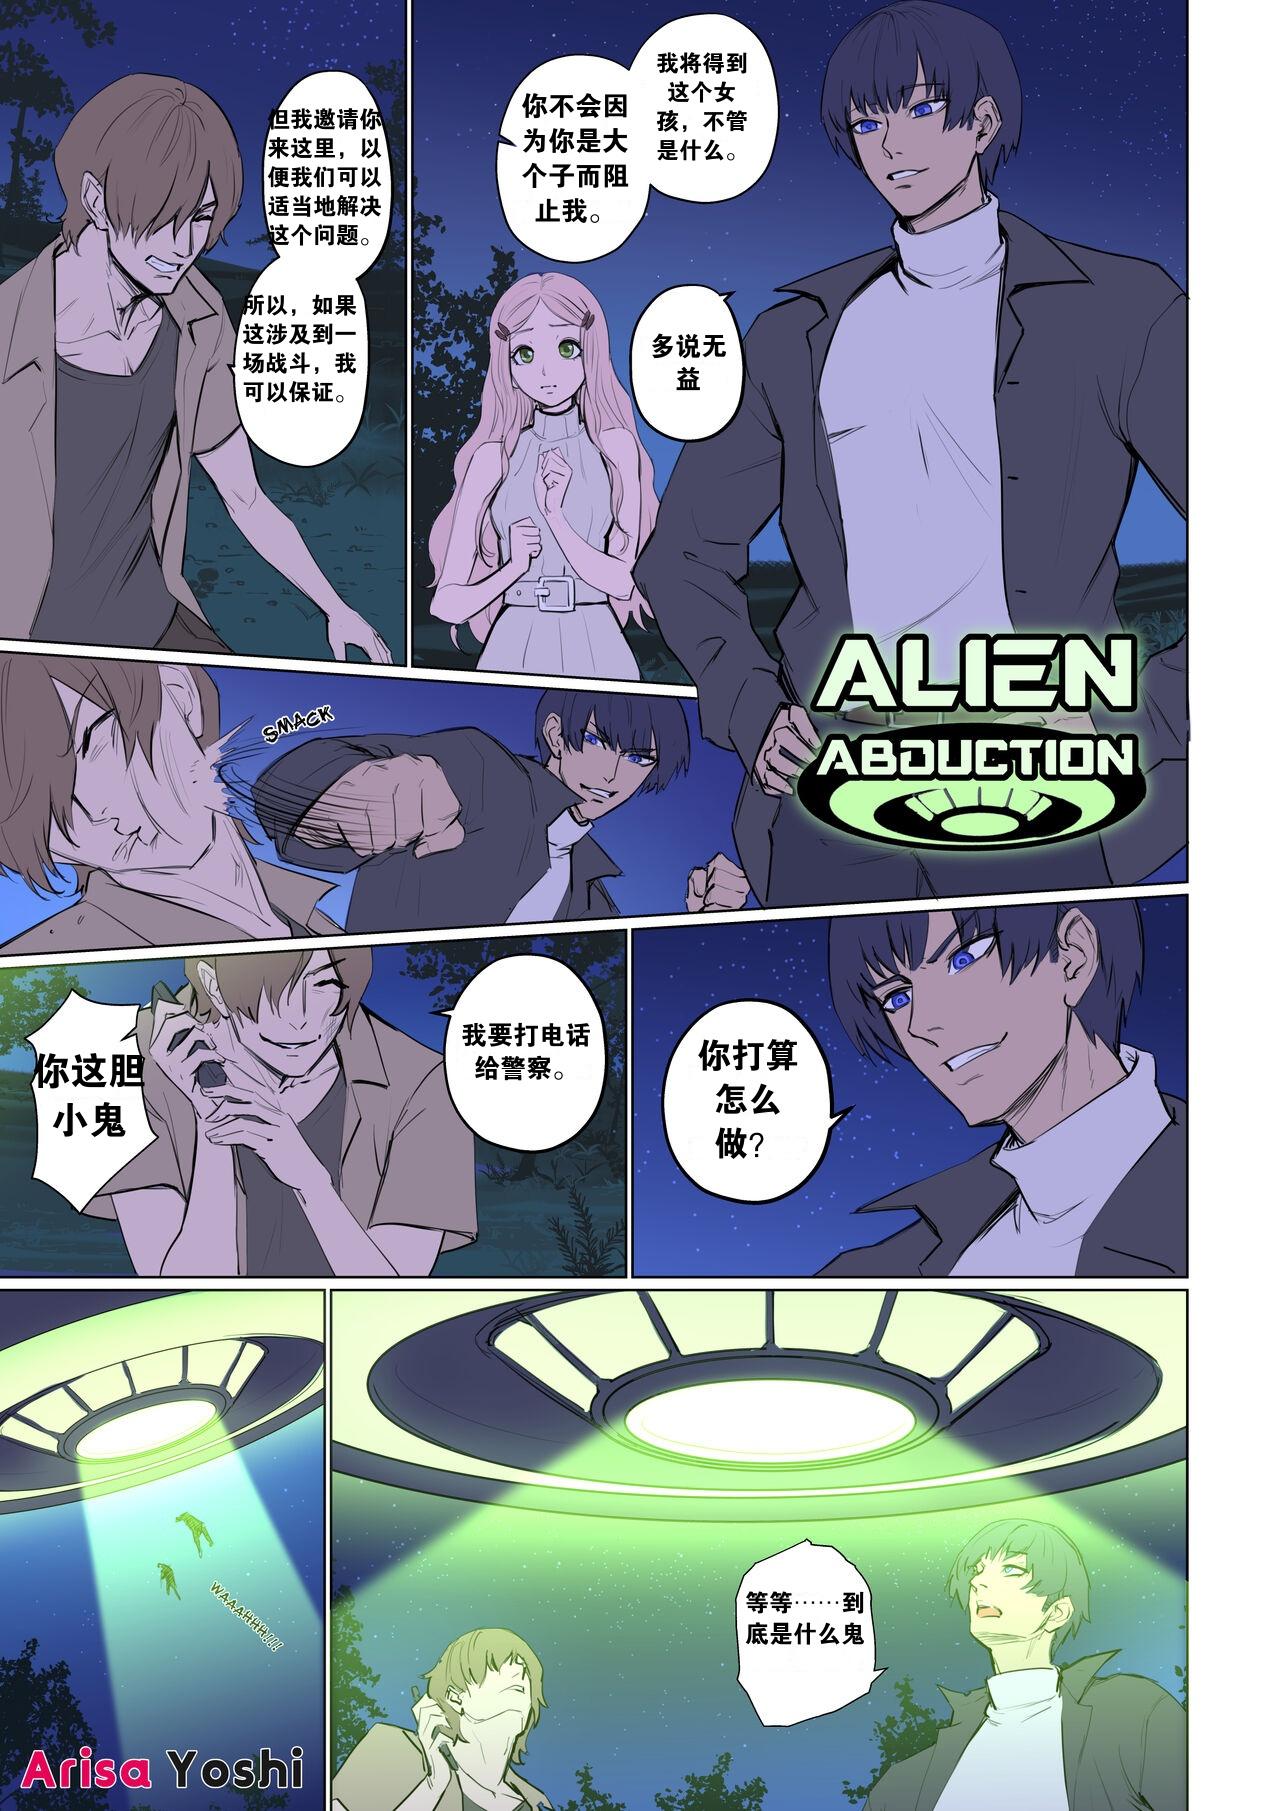 Girl Alien Abduction 1 Stretch - Picture 2